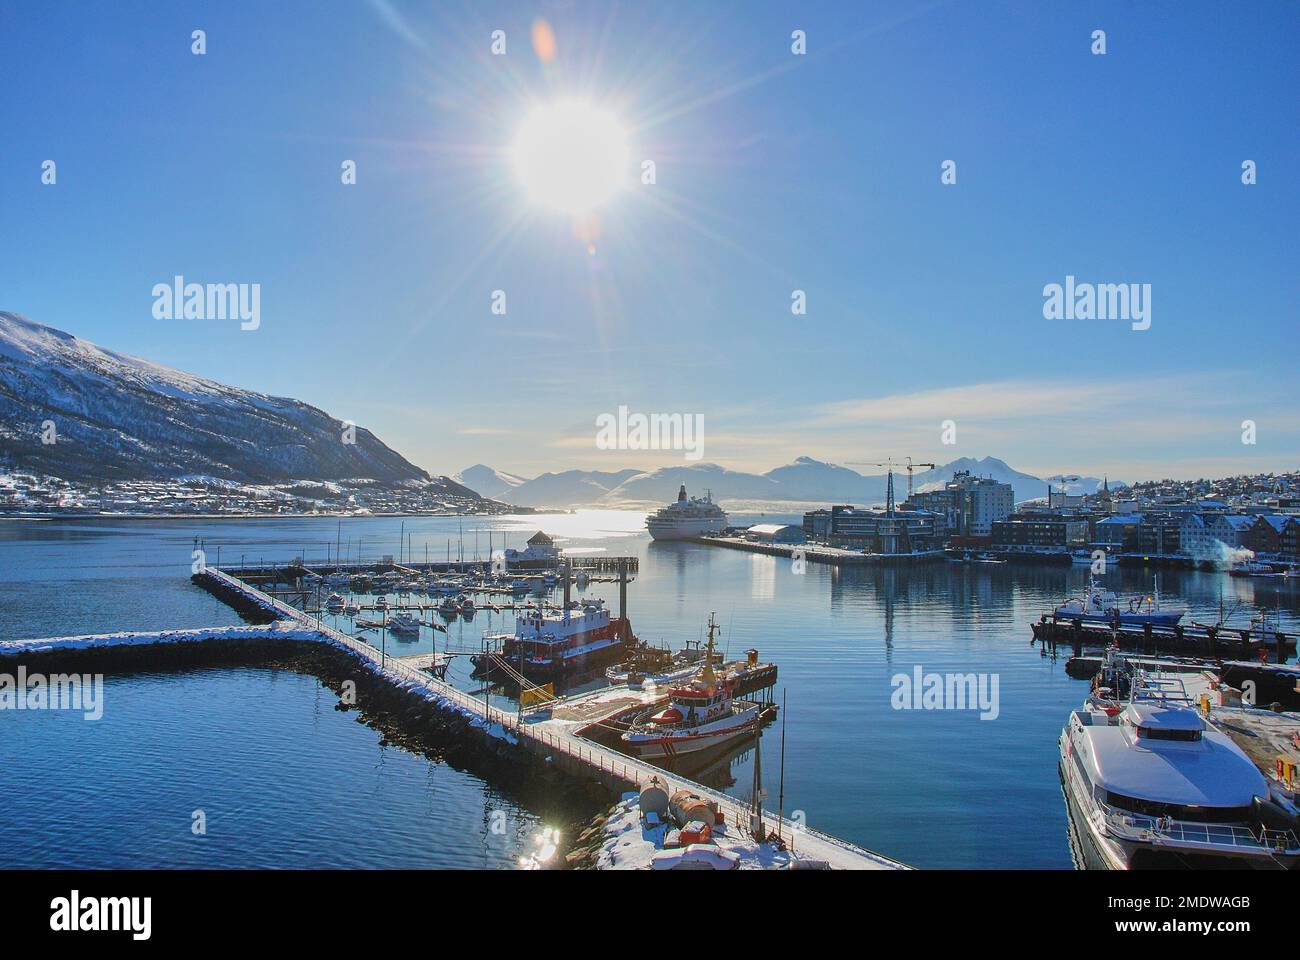 Cruise ship in the winter landscape of the port of Tromso in a fjord at the coastline of northern Norway with snow covered mountains in the background Stock Photo